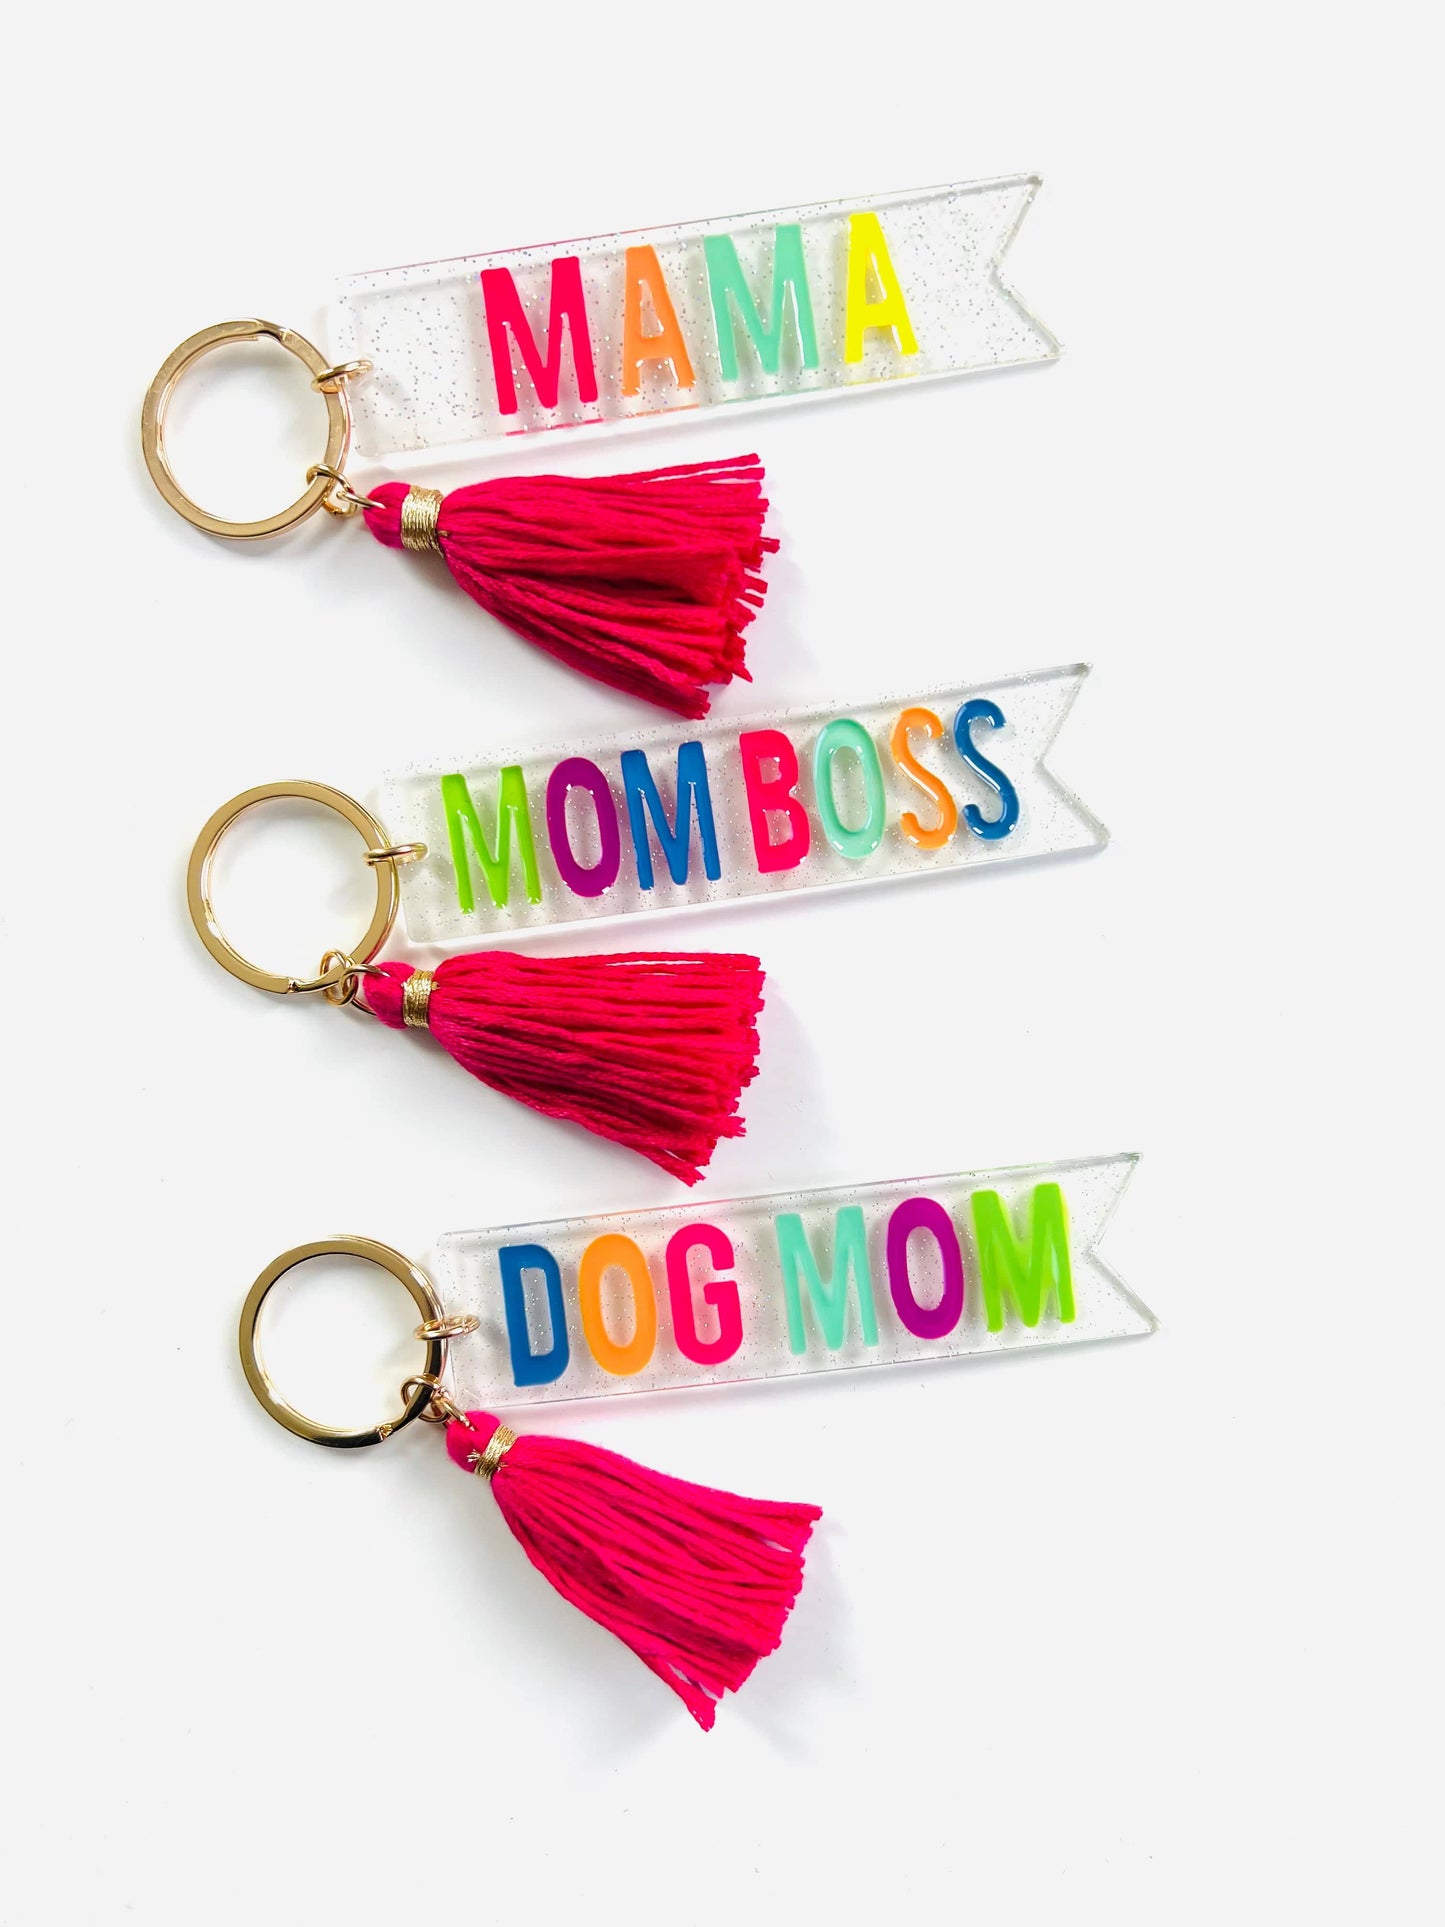 Envy Stylz Boutique Keychain Sayings